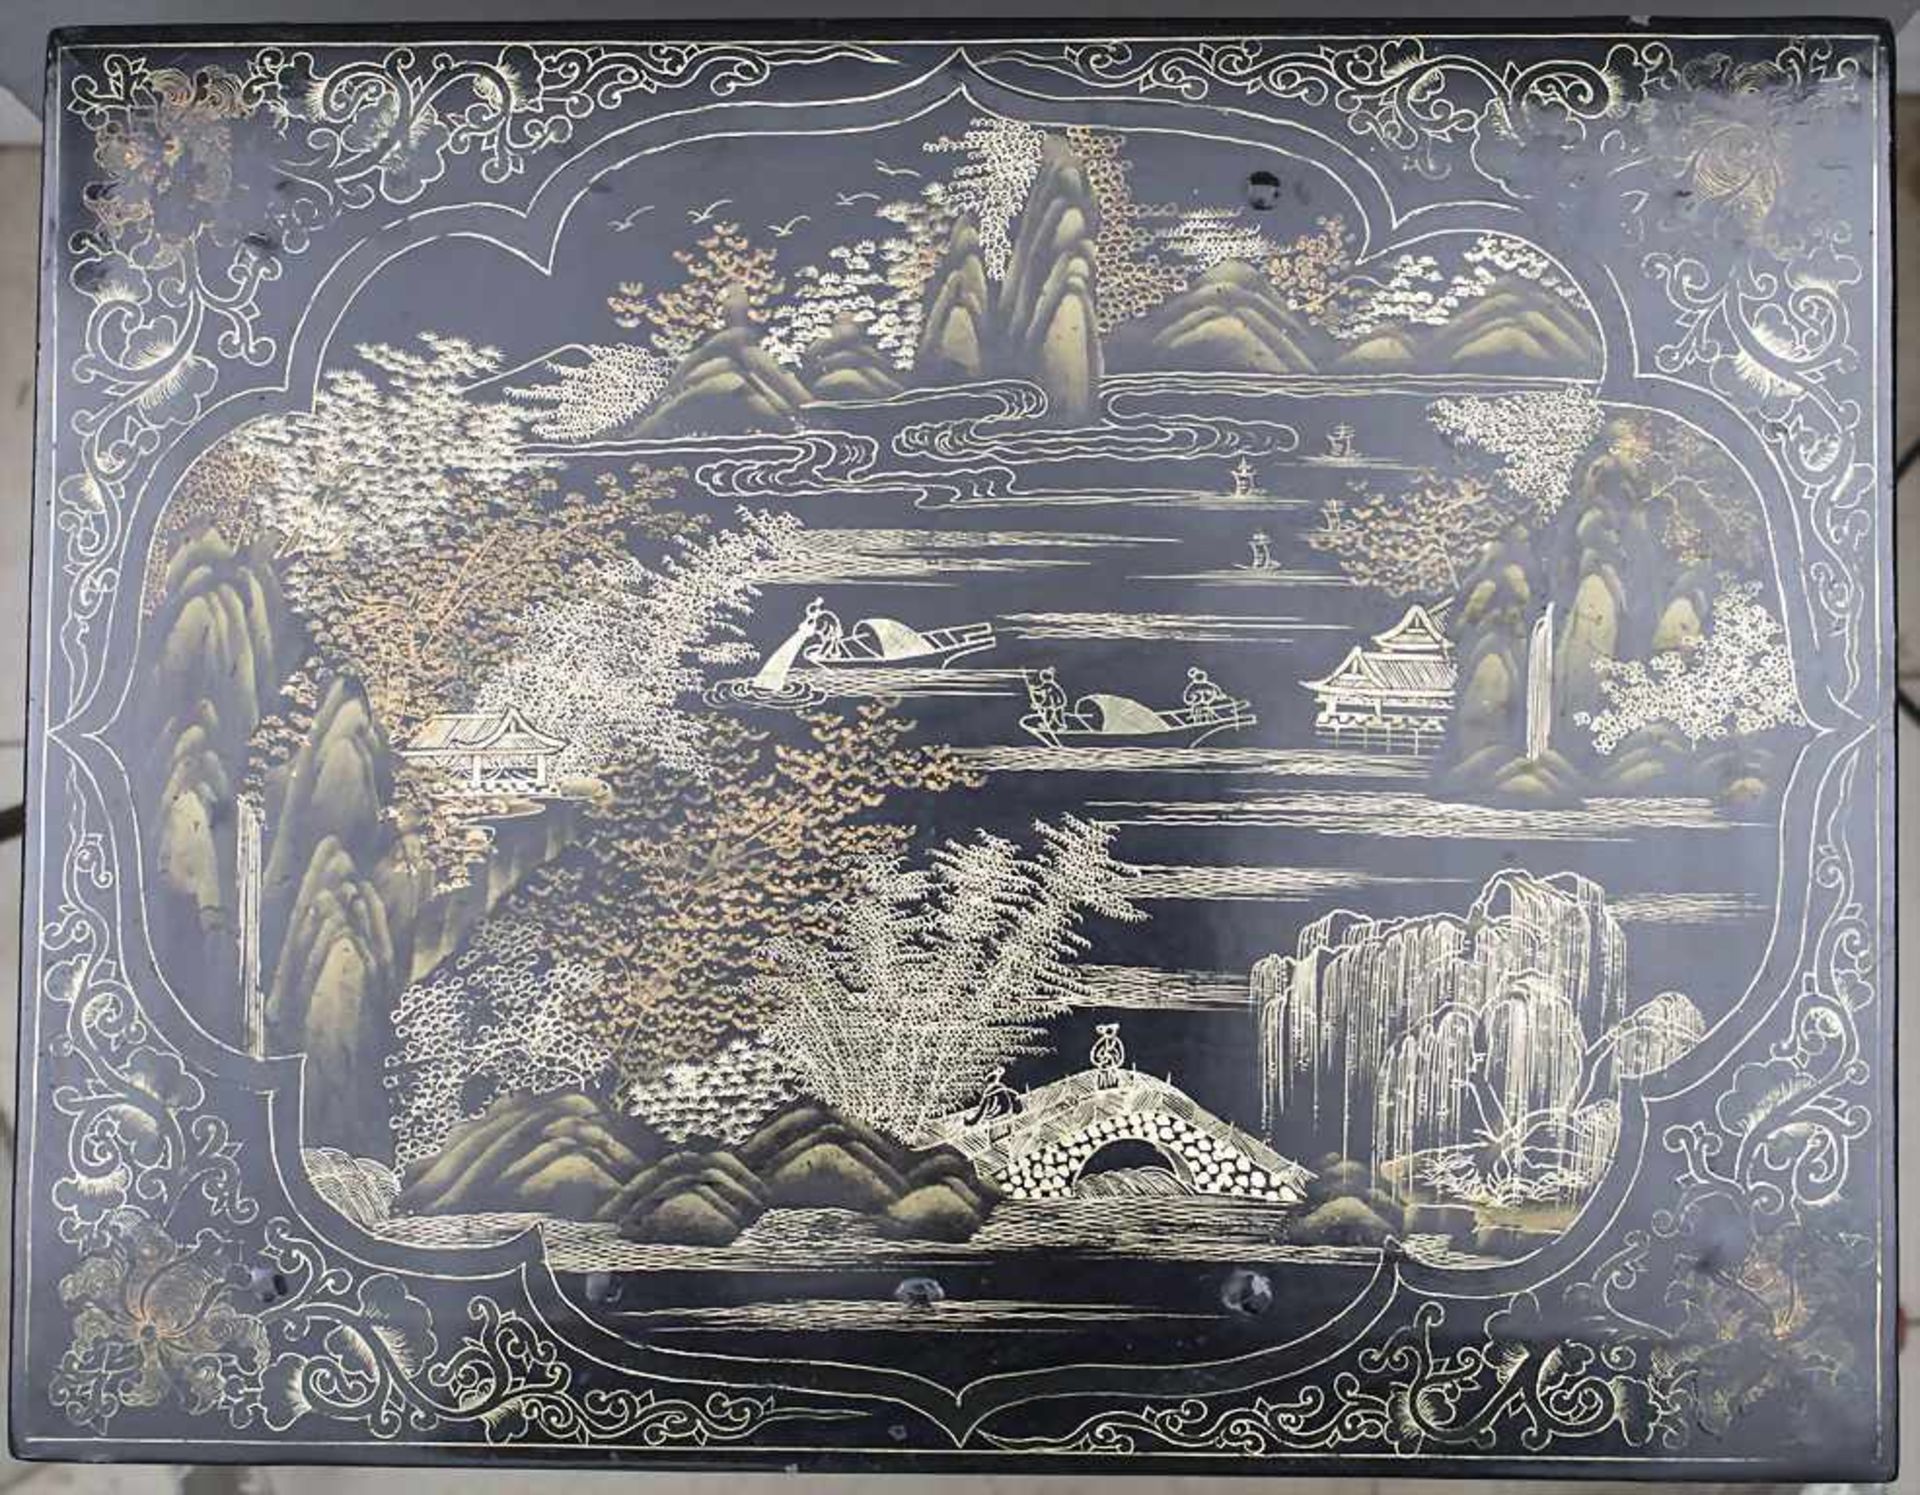 Lacktisch / A lacquer table, China, 20. Jh. - Image 6 of 8